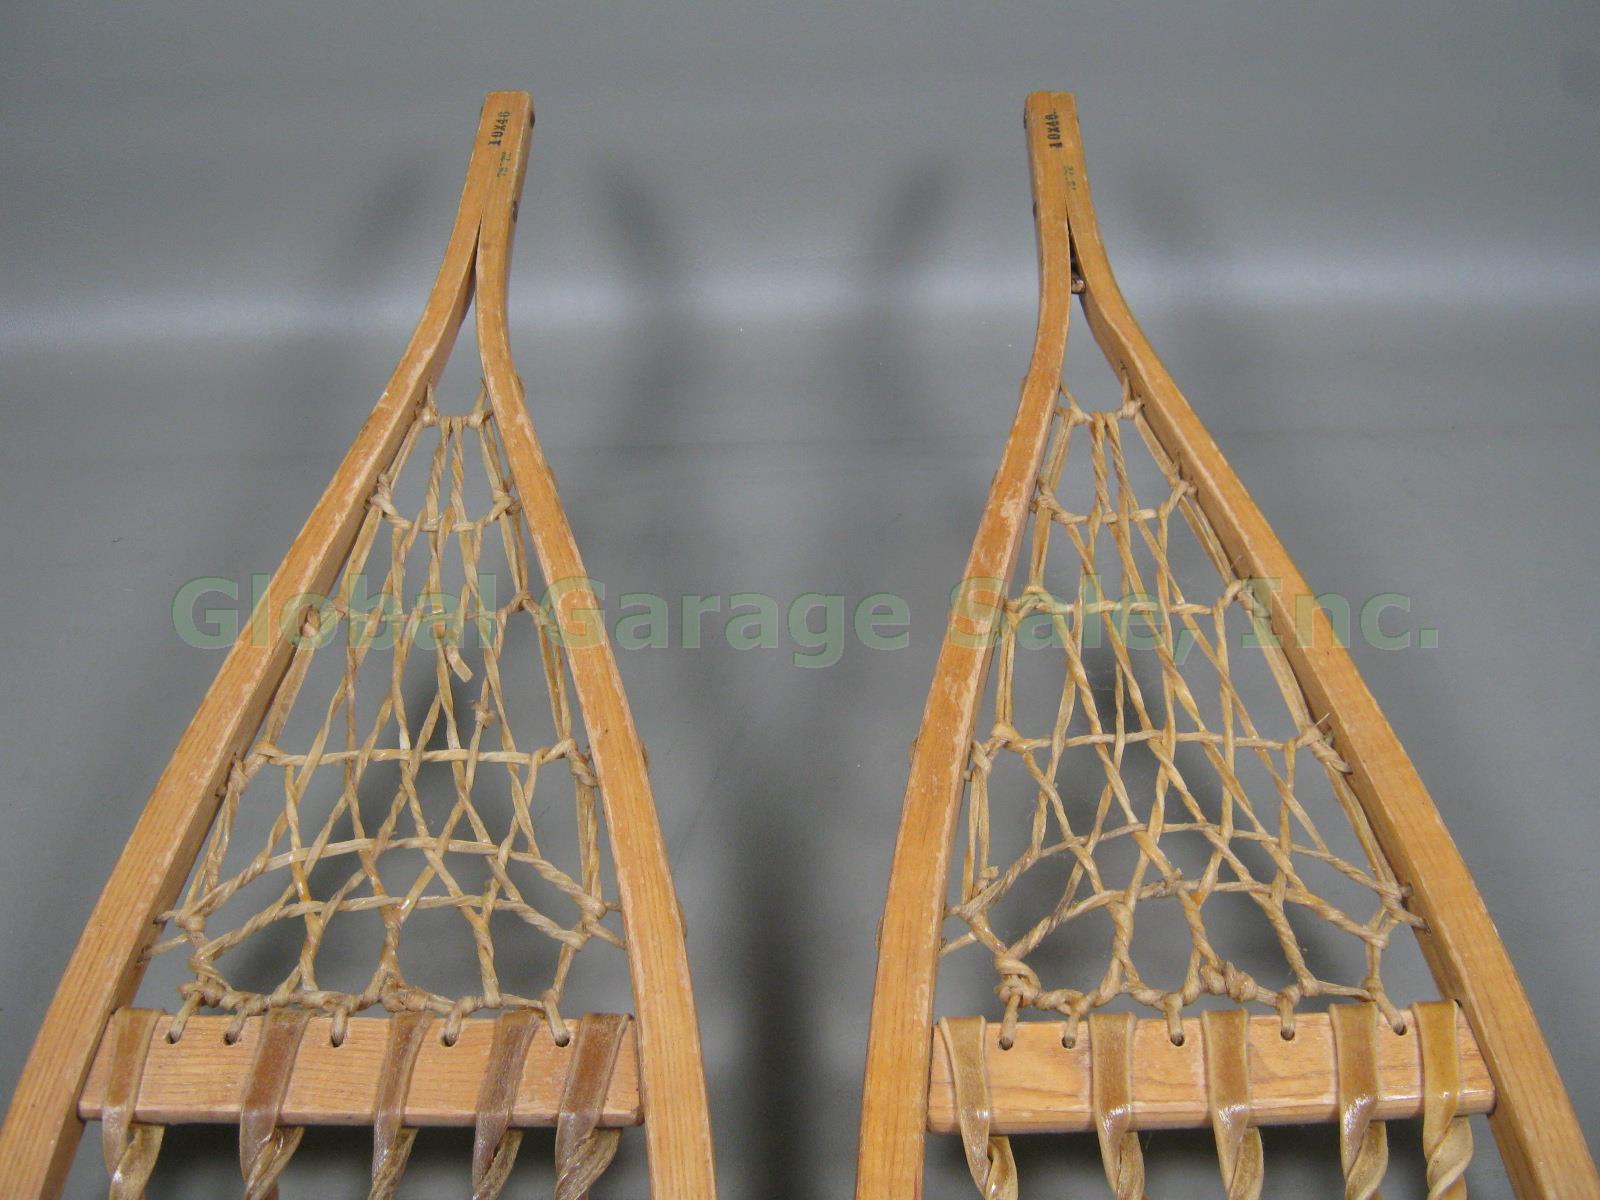 Vtg Antique LL Bean The Maine Wooden Snowshoes 10x46 Made In Freeport Maine NR!! 3